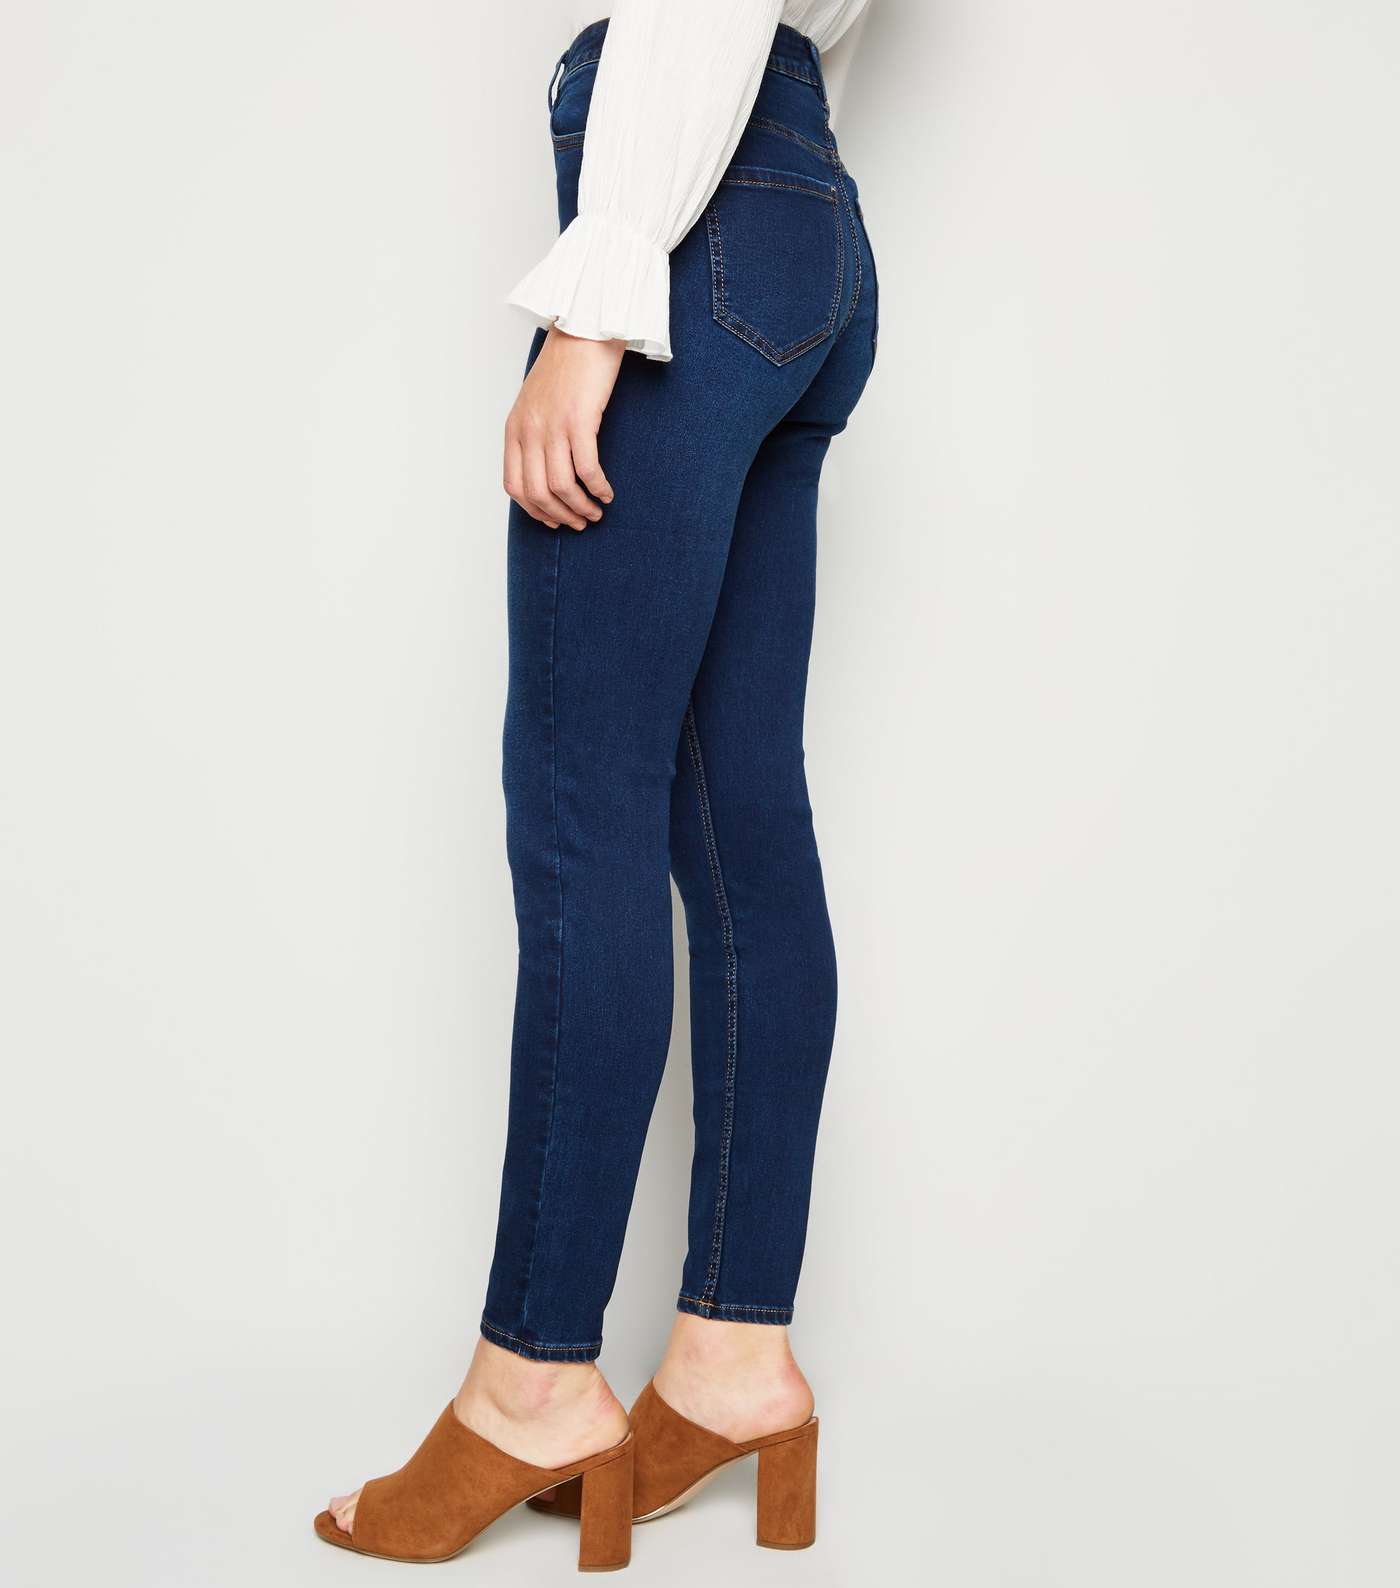 Blue Rinse Wash Mid Rise India Super Skinny Jeans Image 3